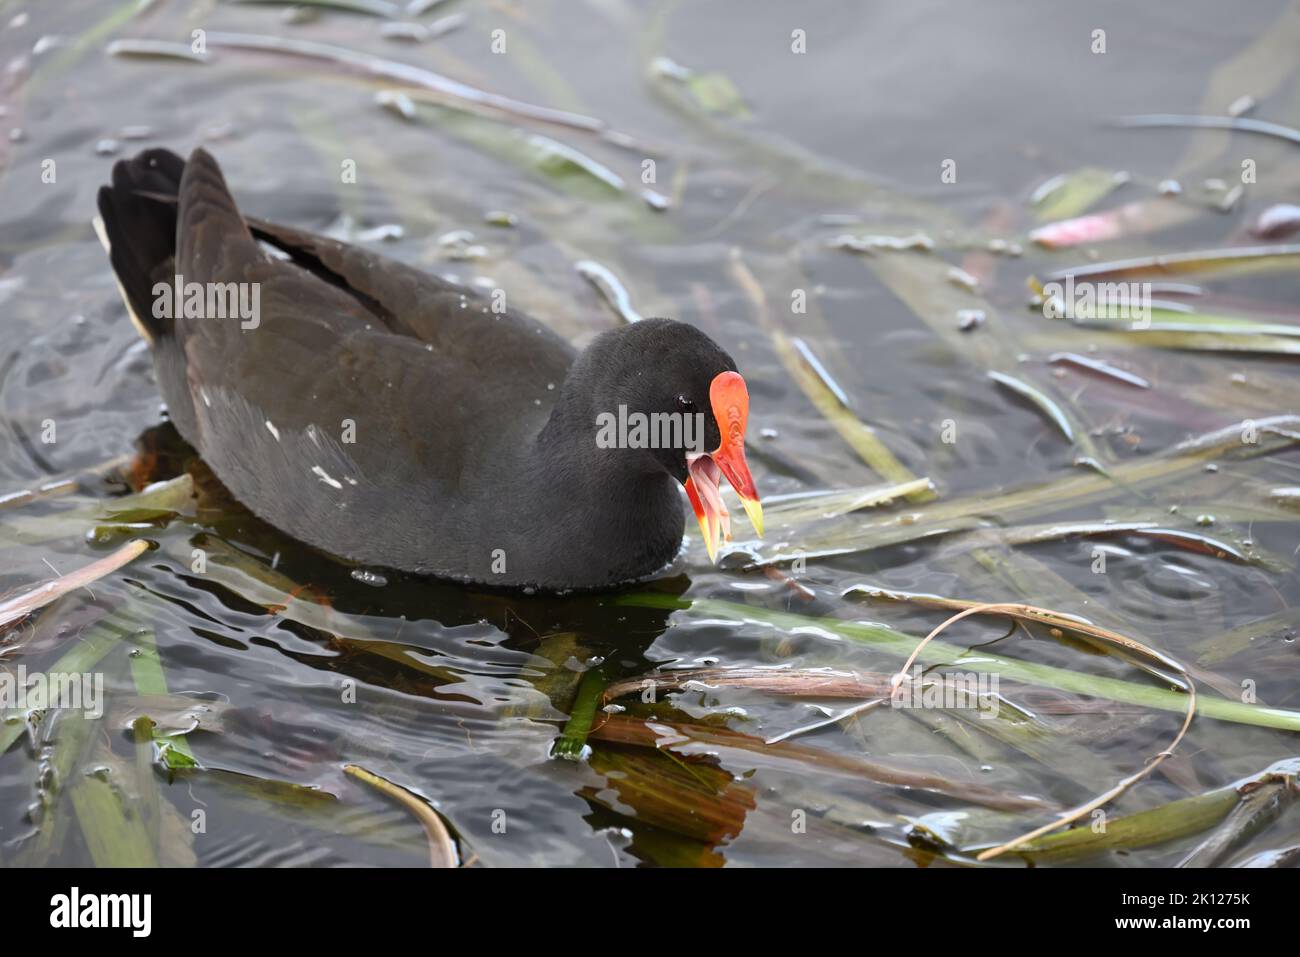 Dusky moorhen in a lake, amongst green reeds, with its bill open and tongue visible as it eats something found in the water Stock Photo